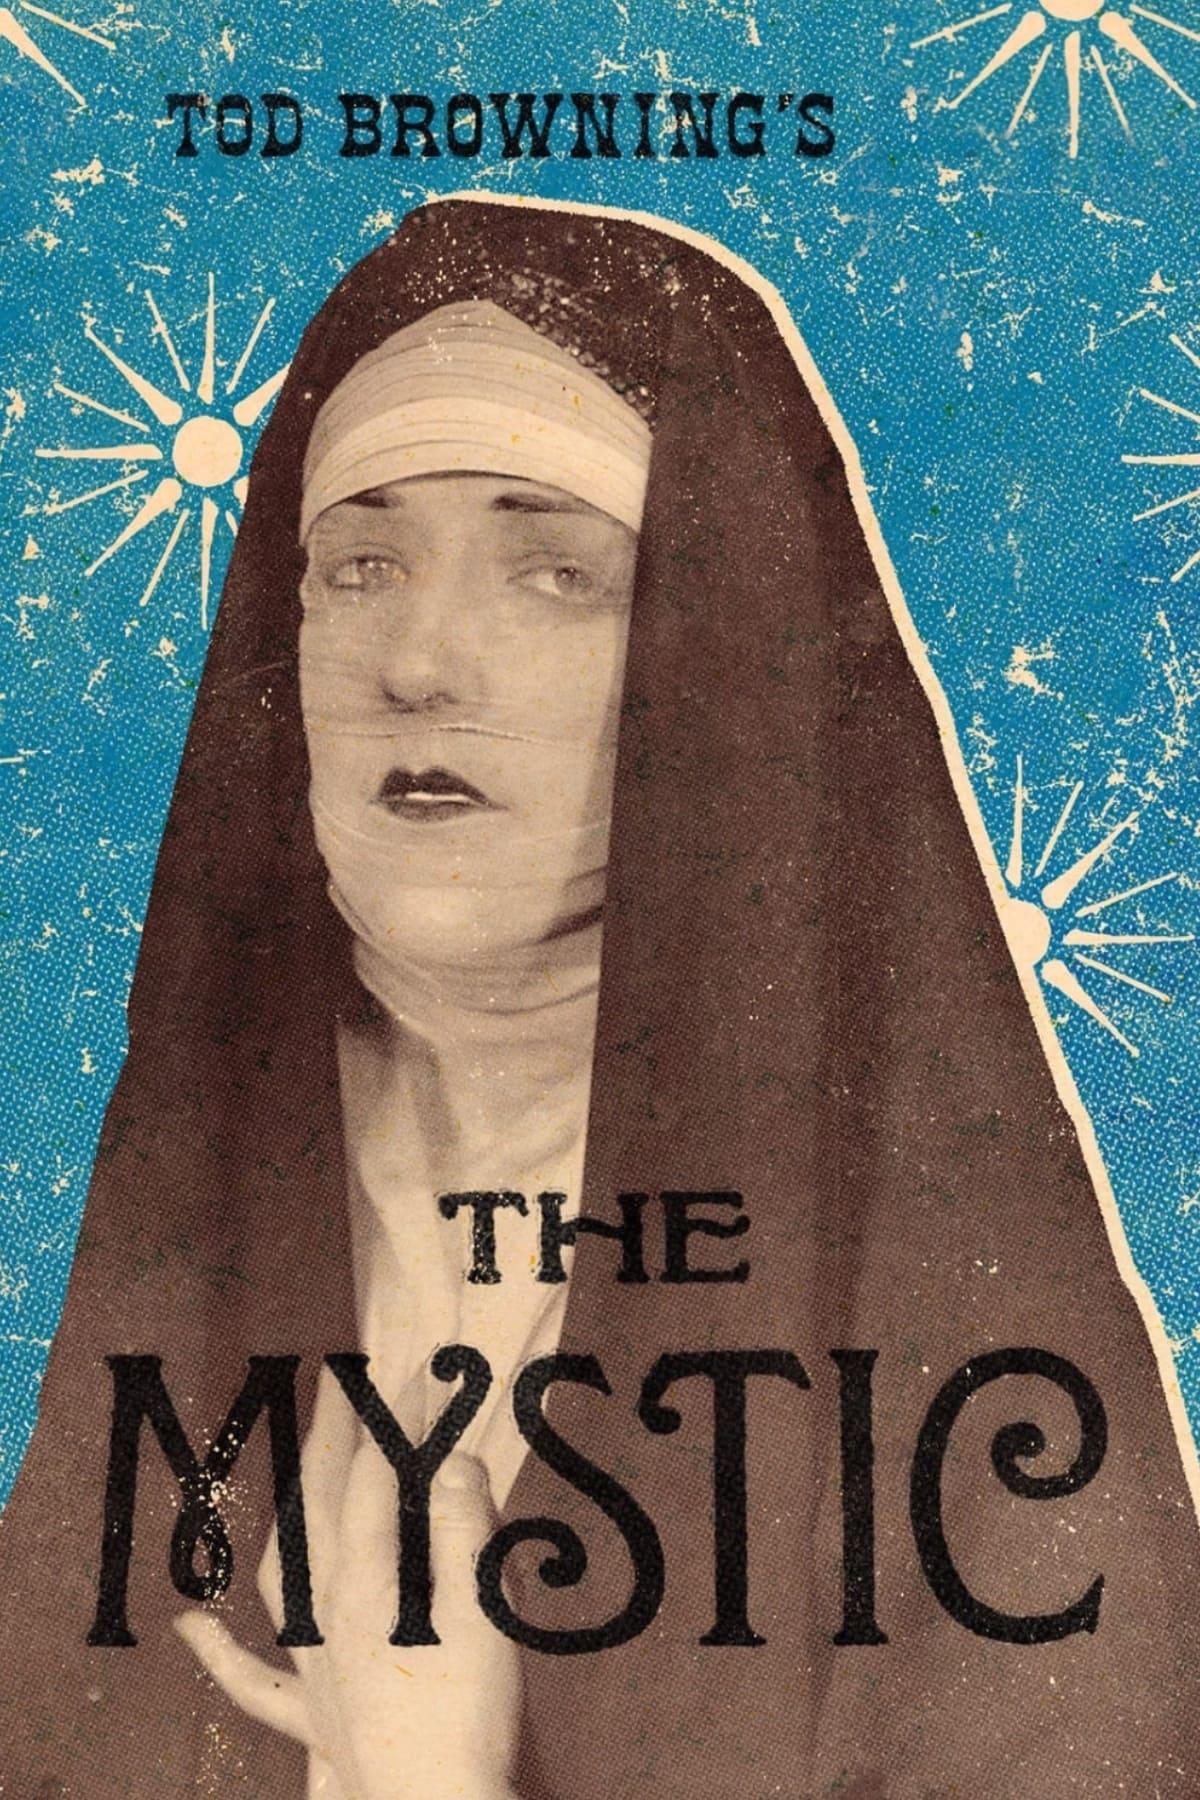 The Mystic poster